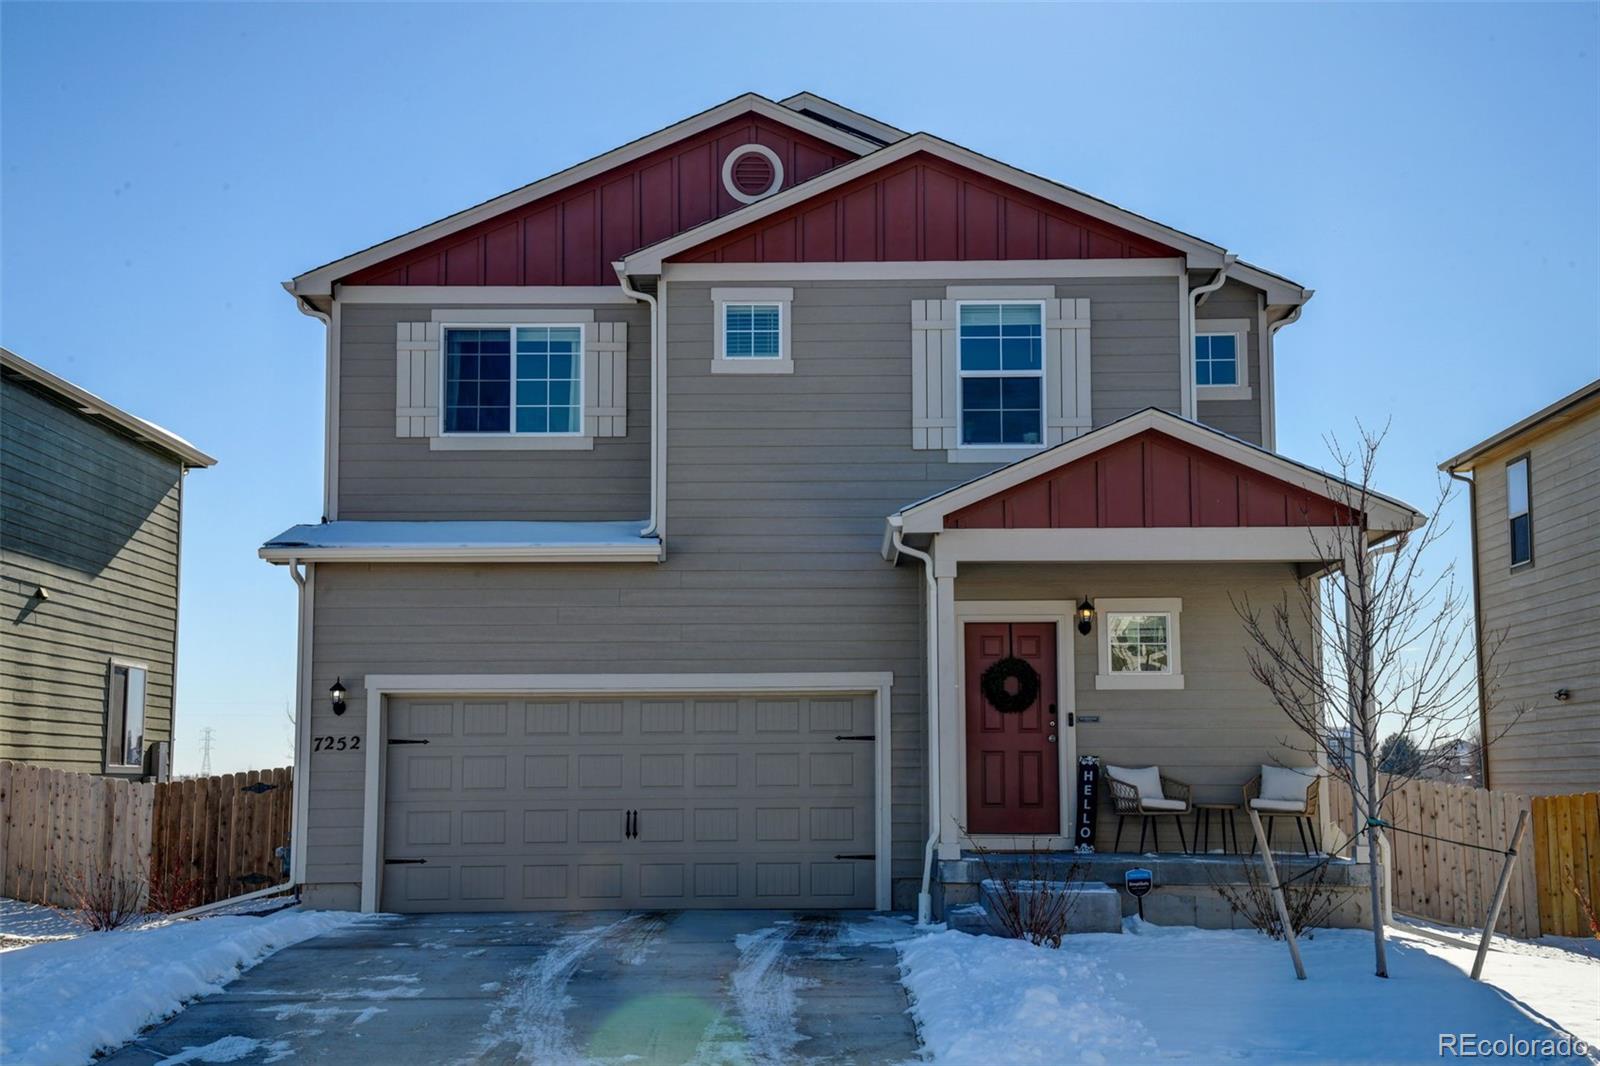 Report Image for 7252  Fall River Circle,Frederick, Colorado